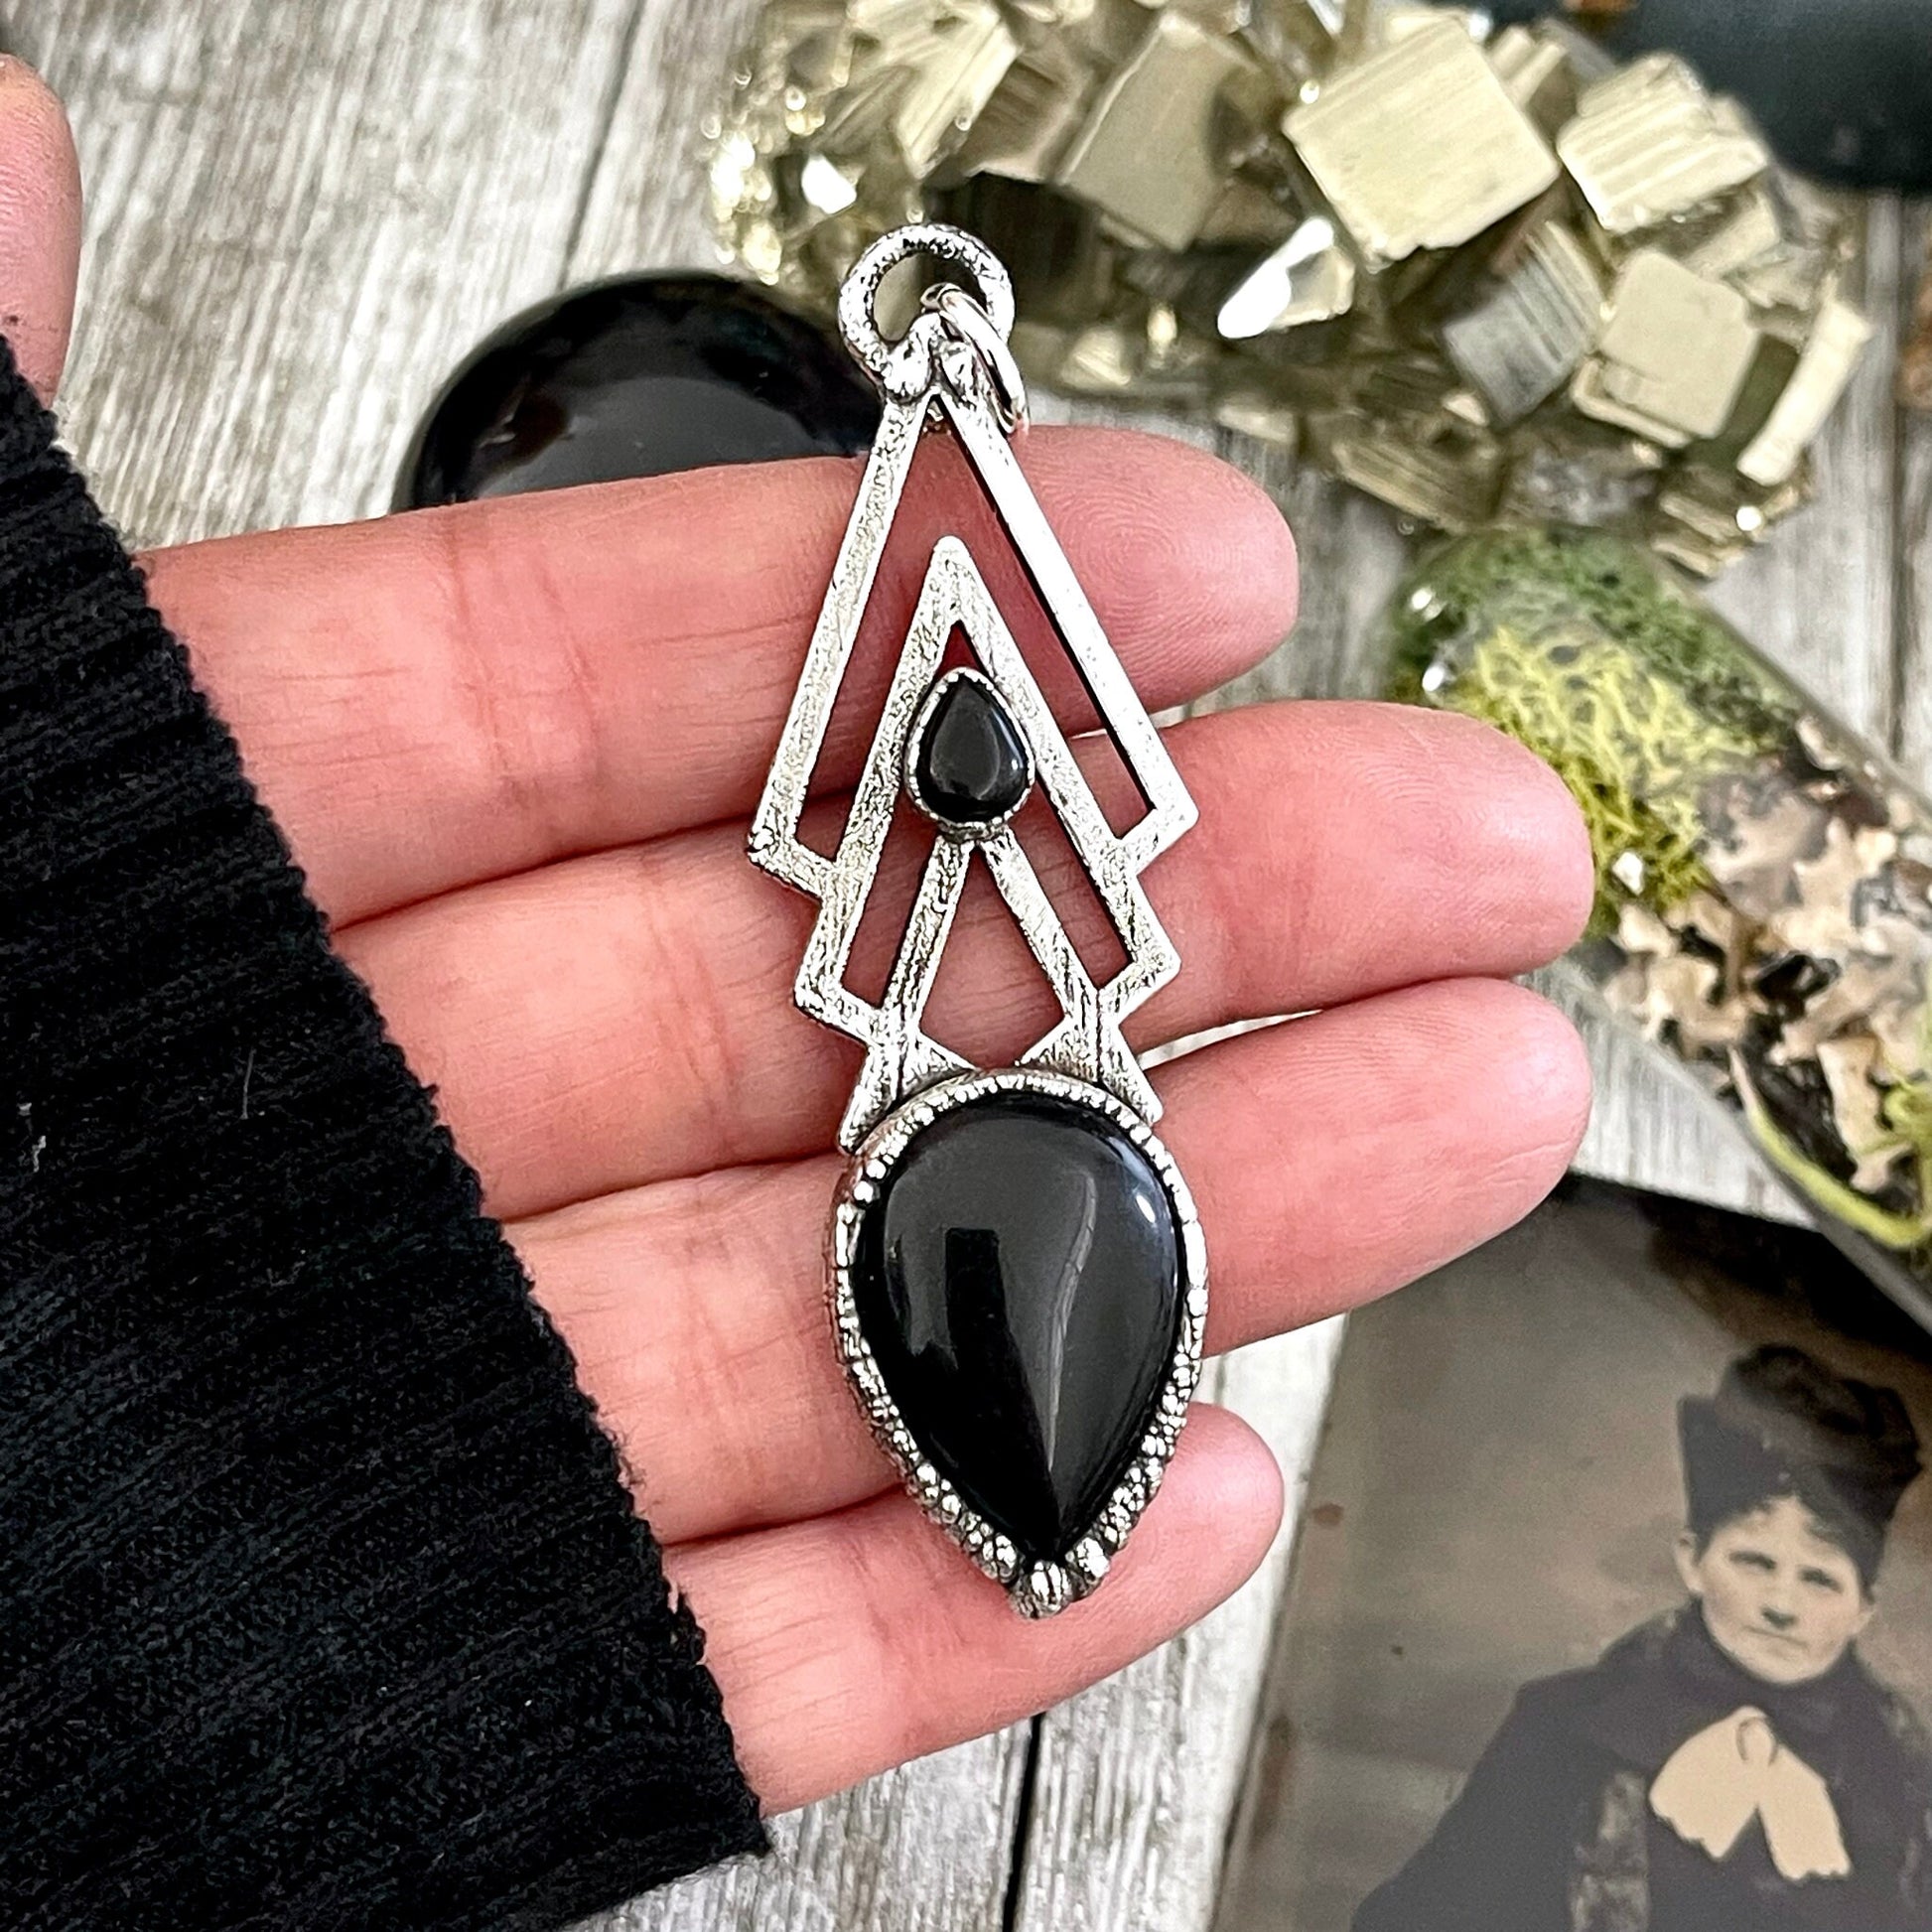 Moss & Moon Collection -Black Onyx Crystal Necklace set in Fine Silver / / Punk Alternative Witchy Pendent Gemstone Jewelry